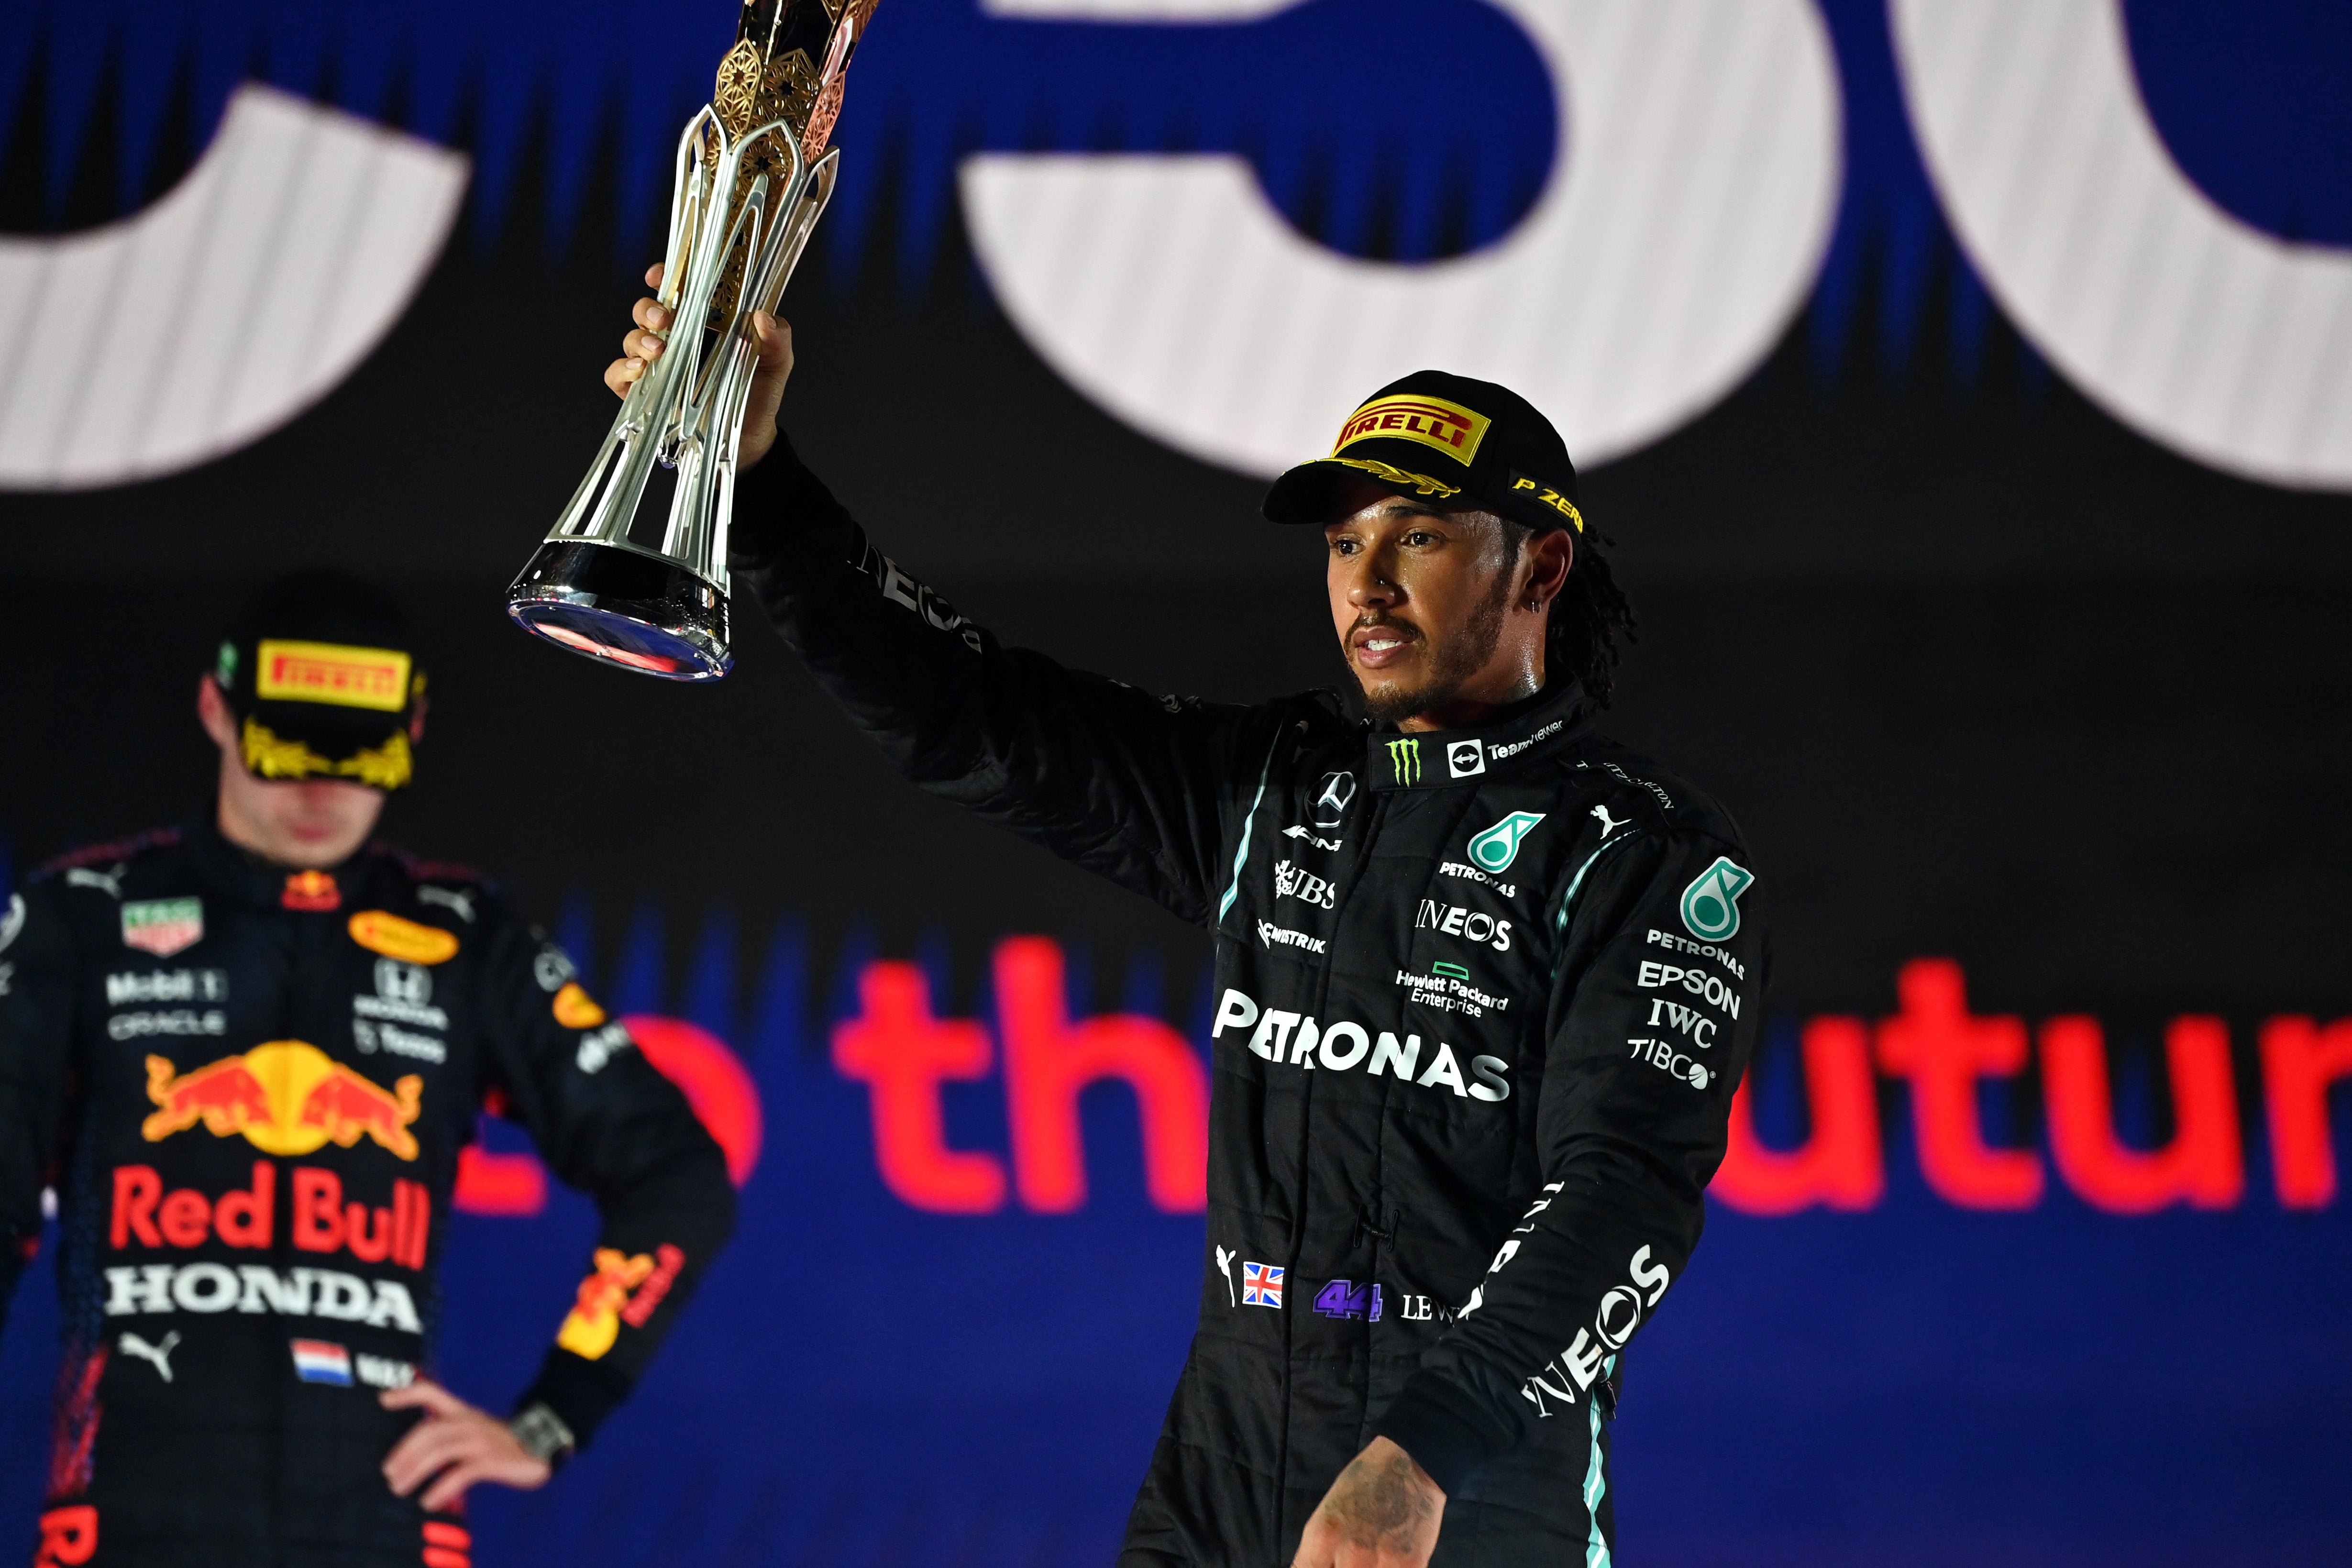 Lewis Hamilton last topped the podium in Jeddah in December 2021